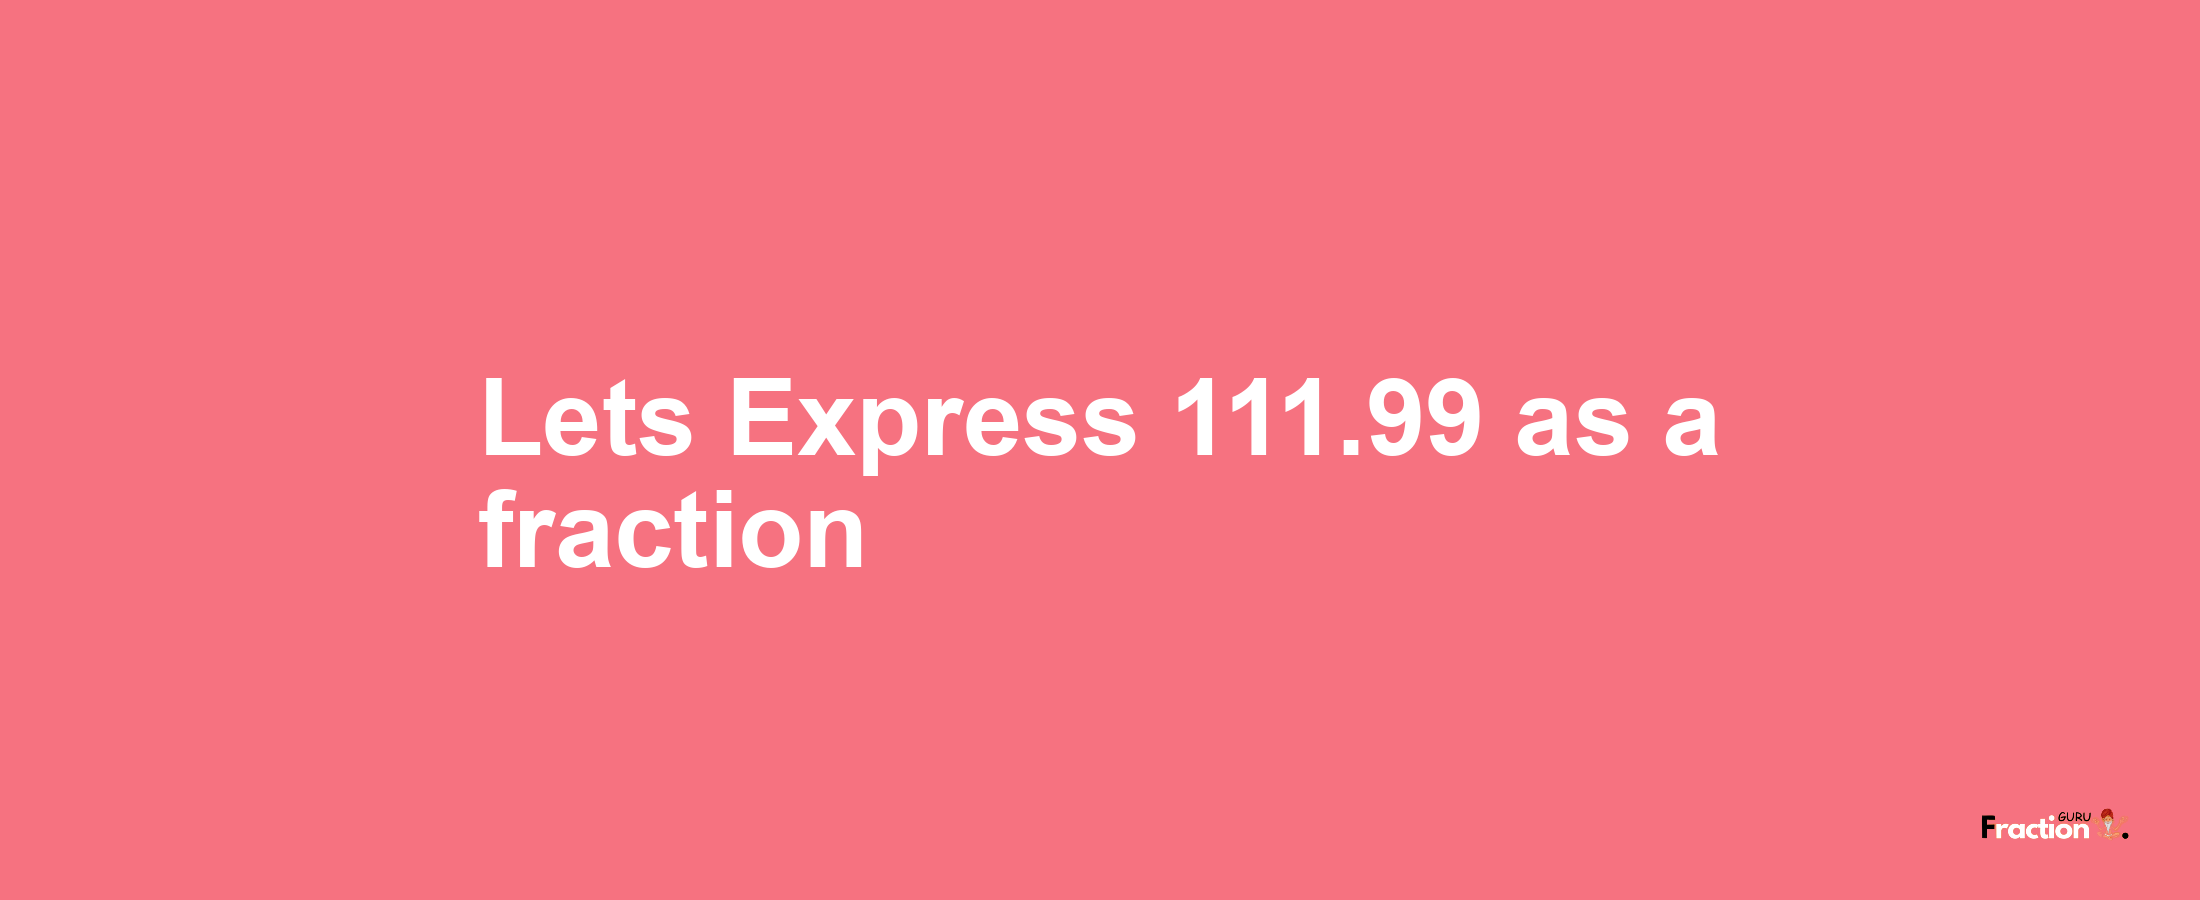 Lets Express 111.99 as afraction